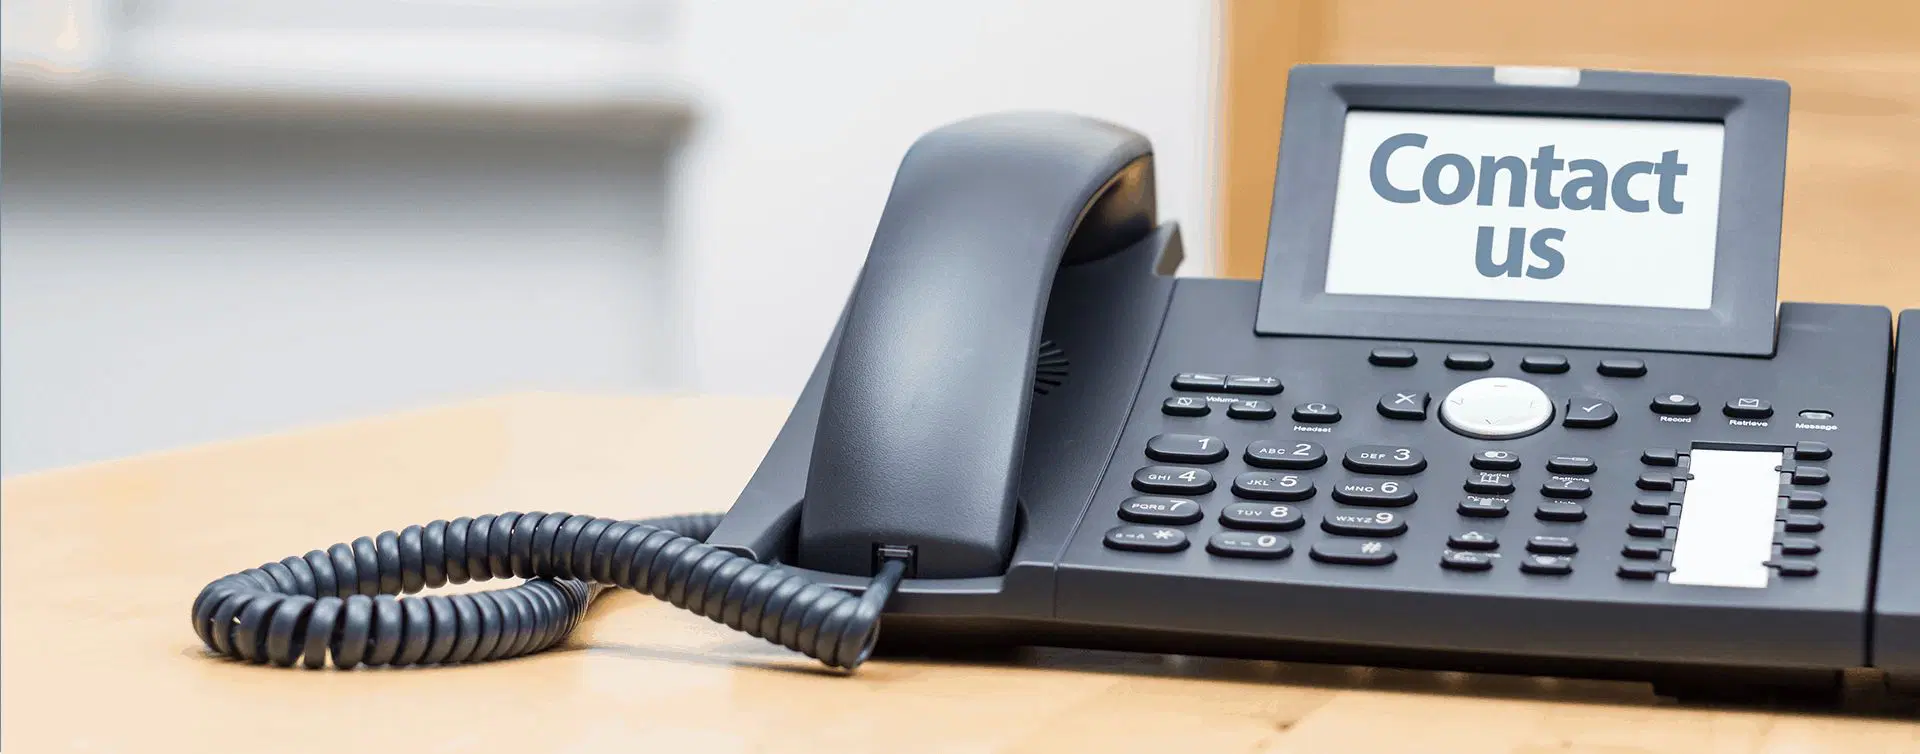 desk phone with the words Contact Us on the digital screen